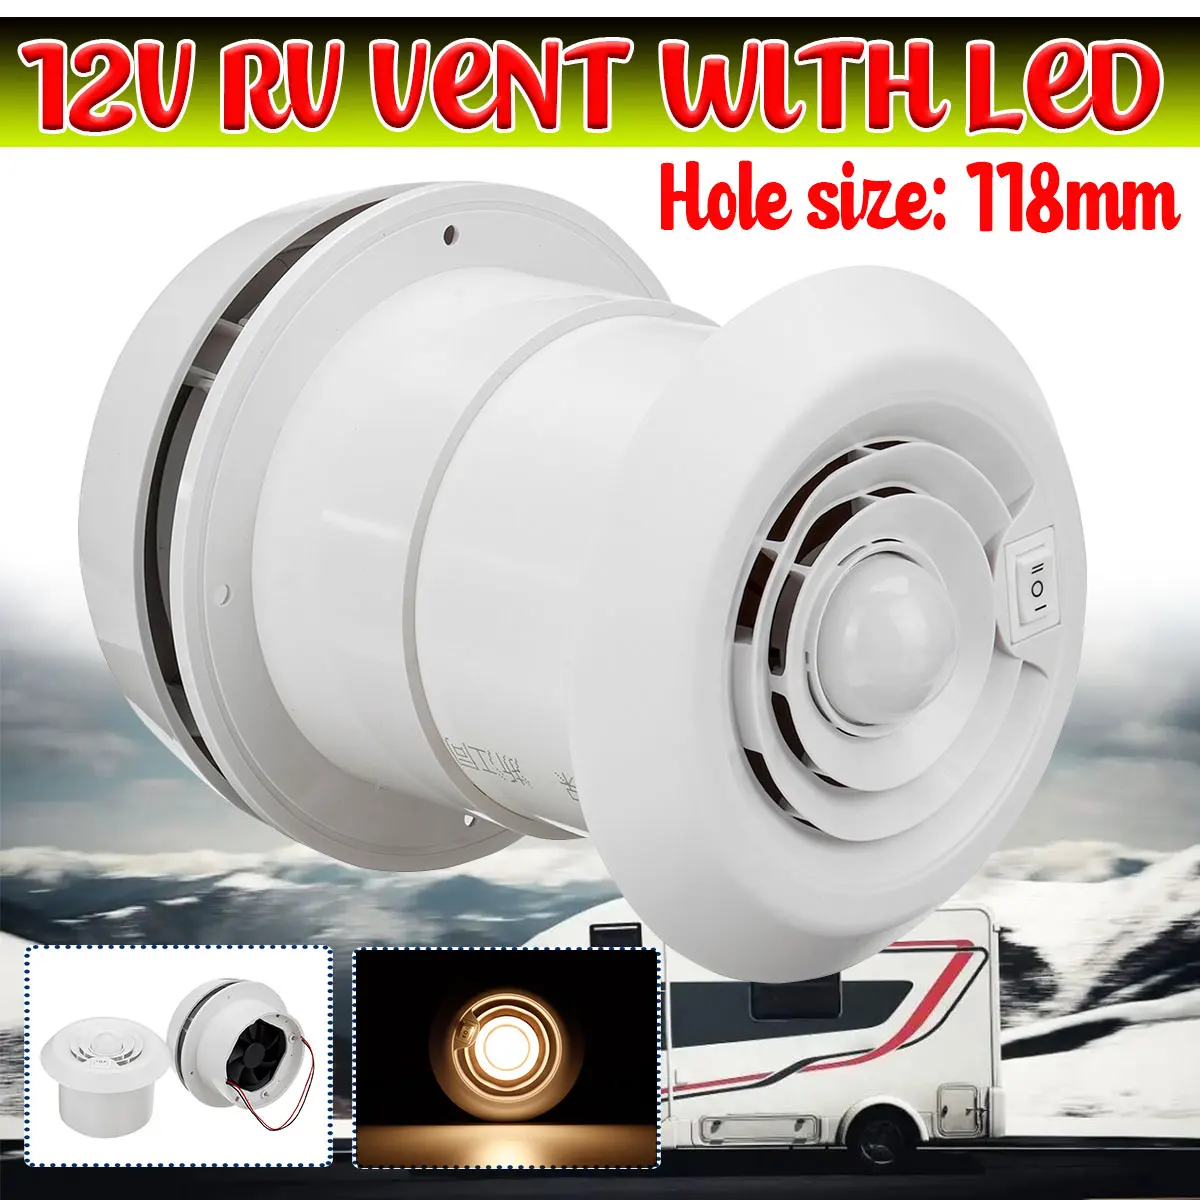 

200CFM 12V RV Roof Ventilation Ceiling Exhaust Fan Air Vent Grille Strong Wind Fan with LED Light for Caravan Motorhome Trailer